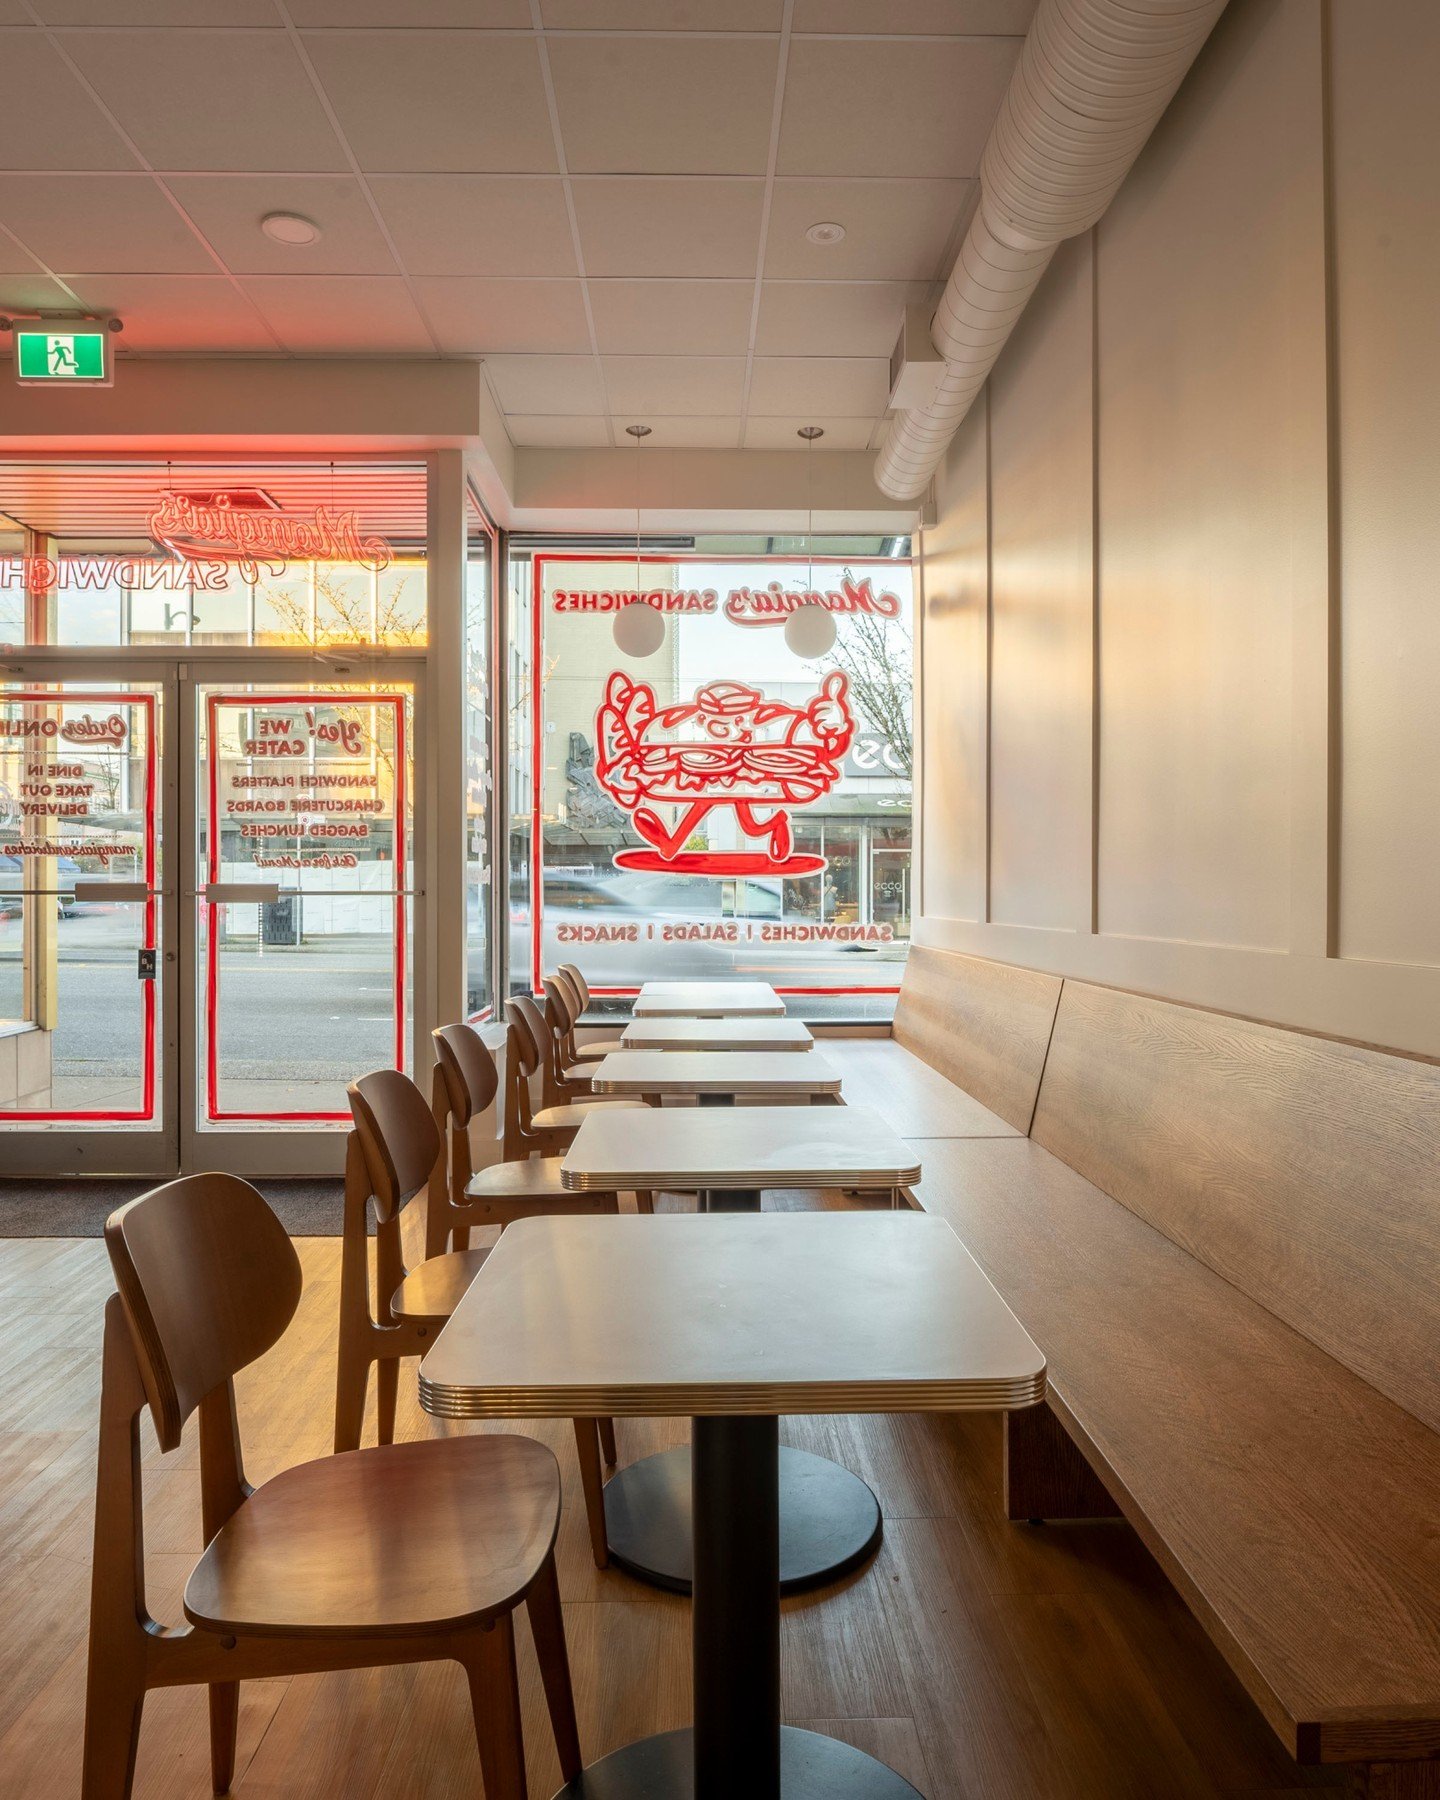 Introducing the new gem of South Granville! 

We've revamped this cozy take-out joint into a haven for authentic Italian sandwiches that speak straight to your taste buds. We worked with the owner to create a warm, inviting space that was simple enou